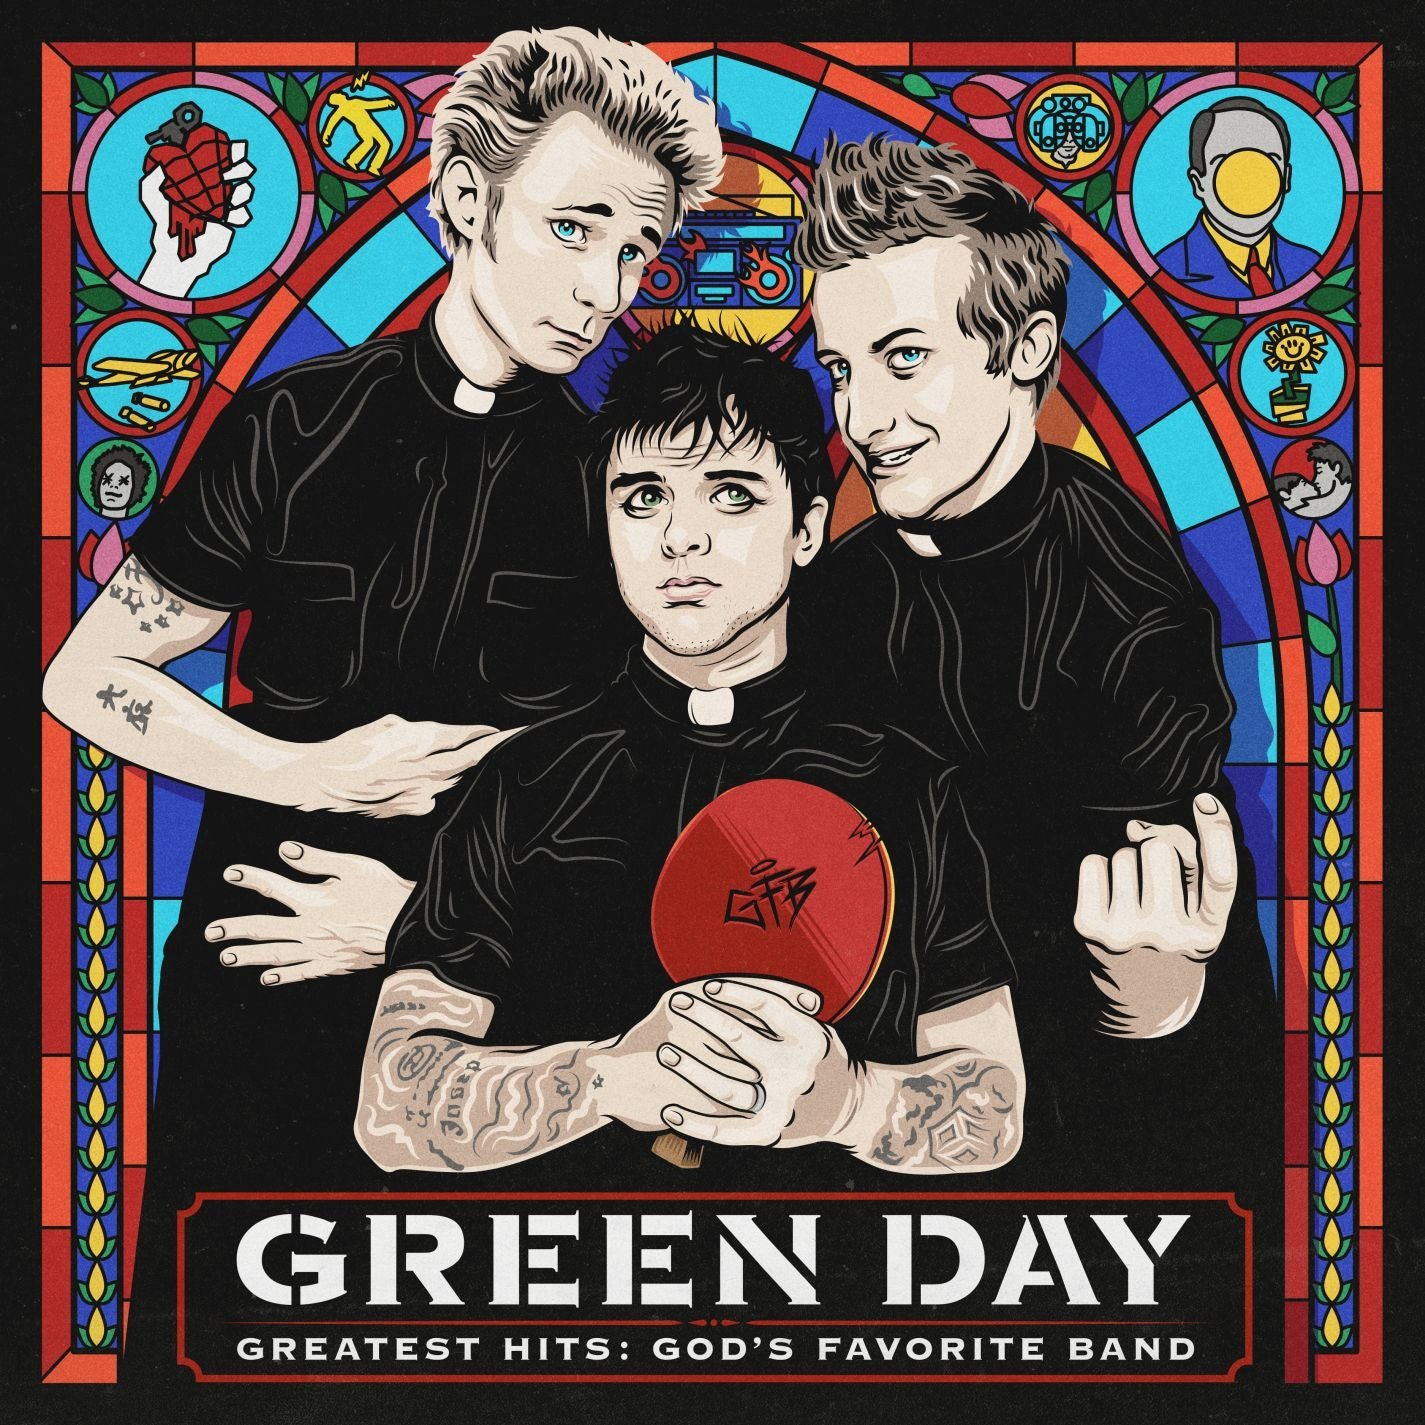 Green Day – Greatest Hits: God's Favorite Band | Buy the Vinyl LP from Flying Nun Records